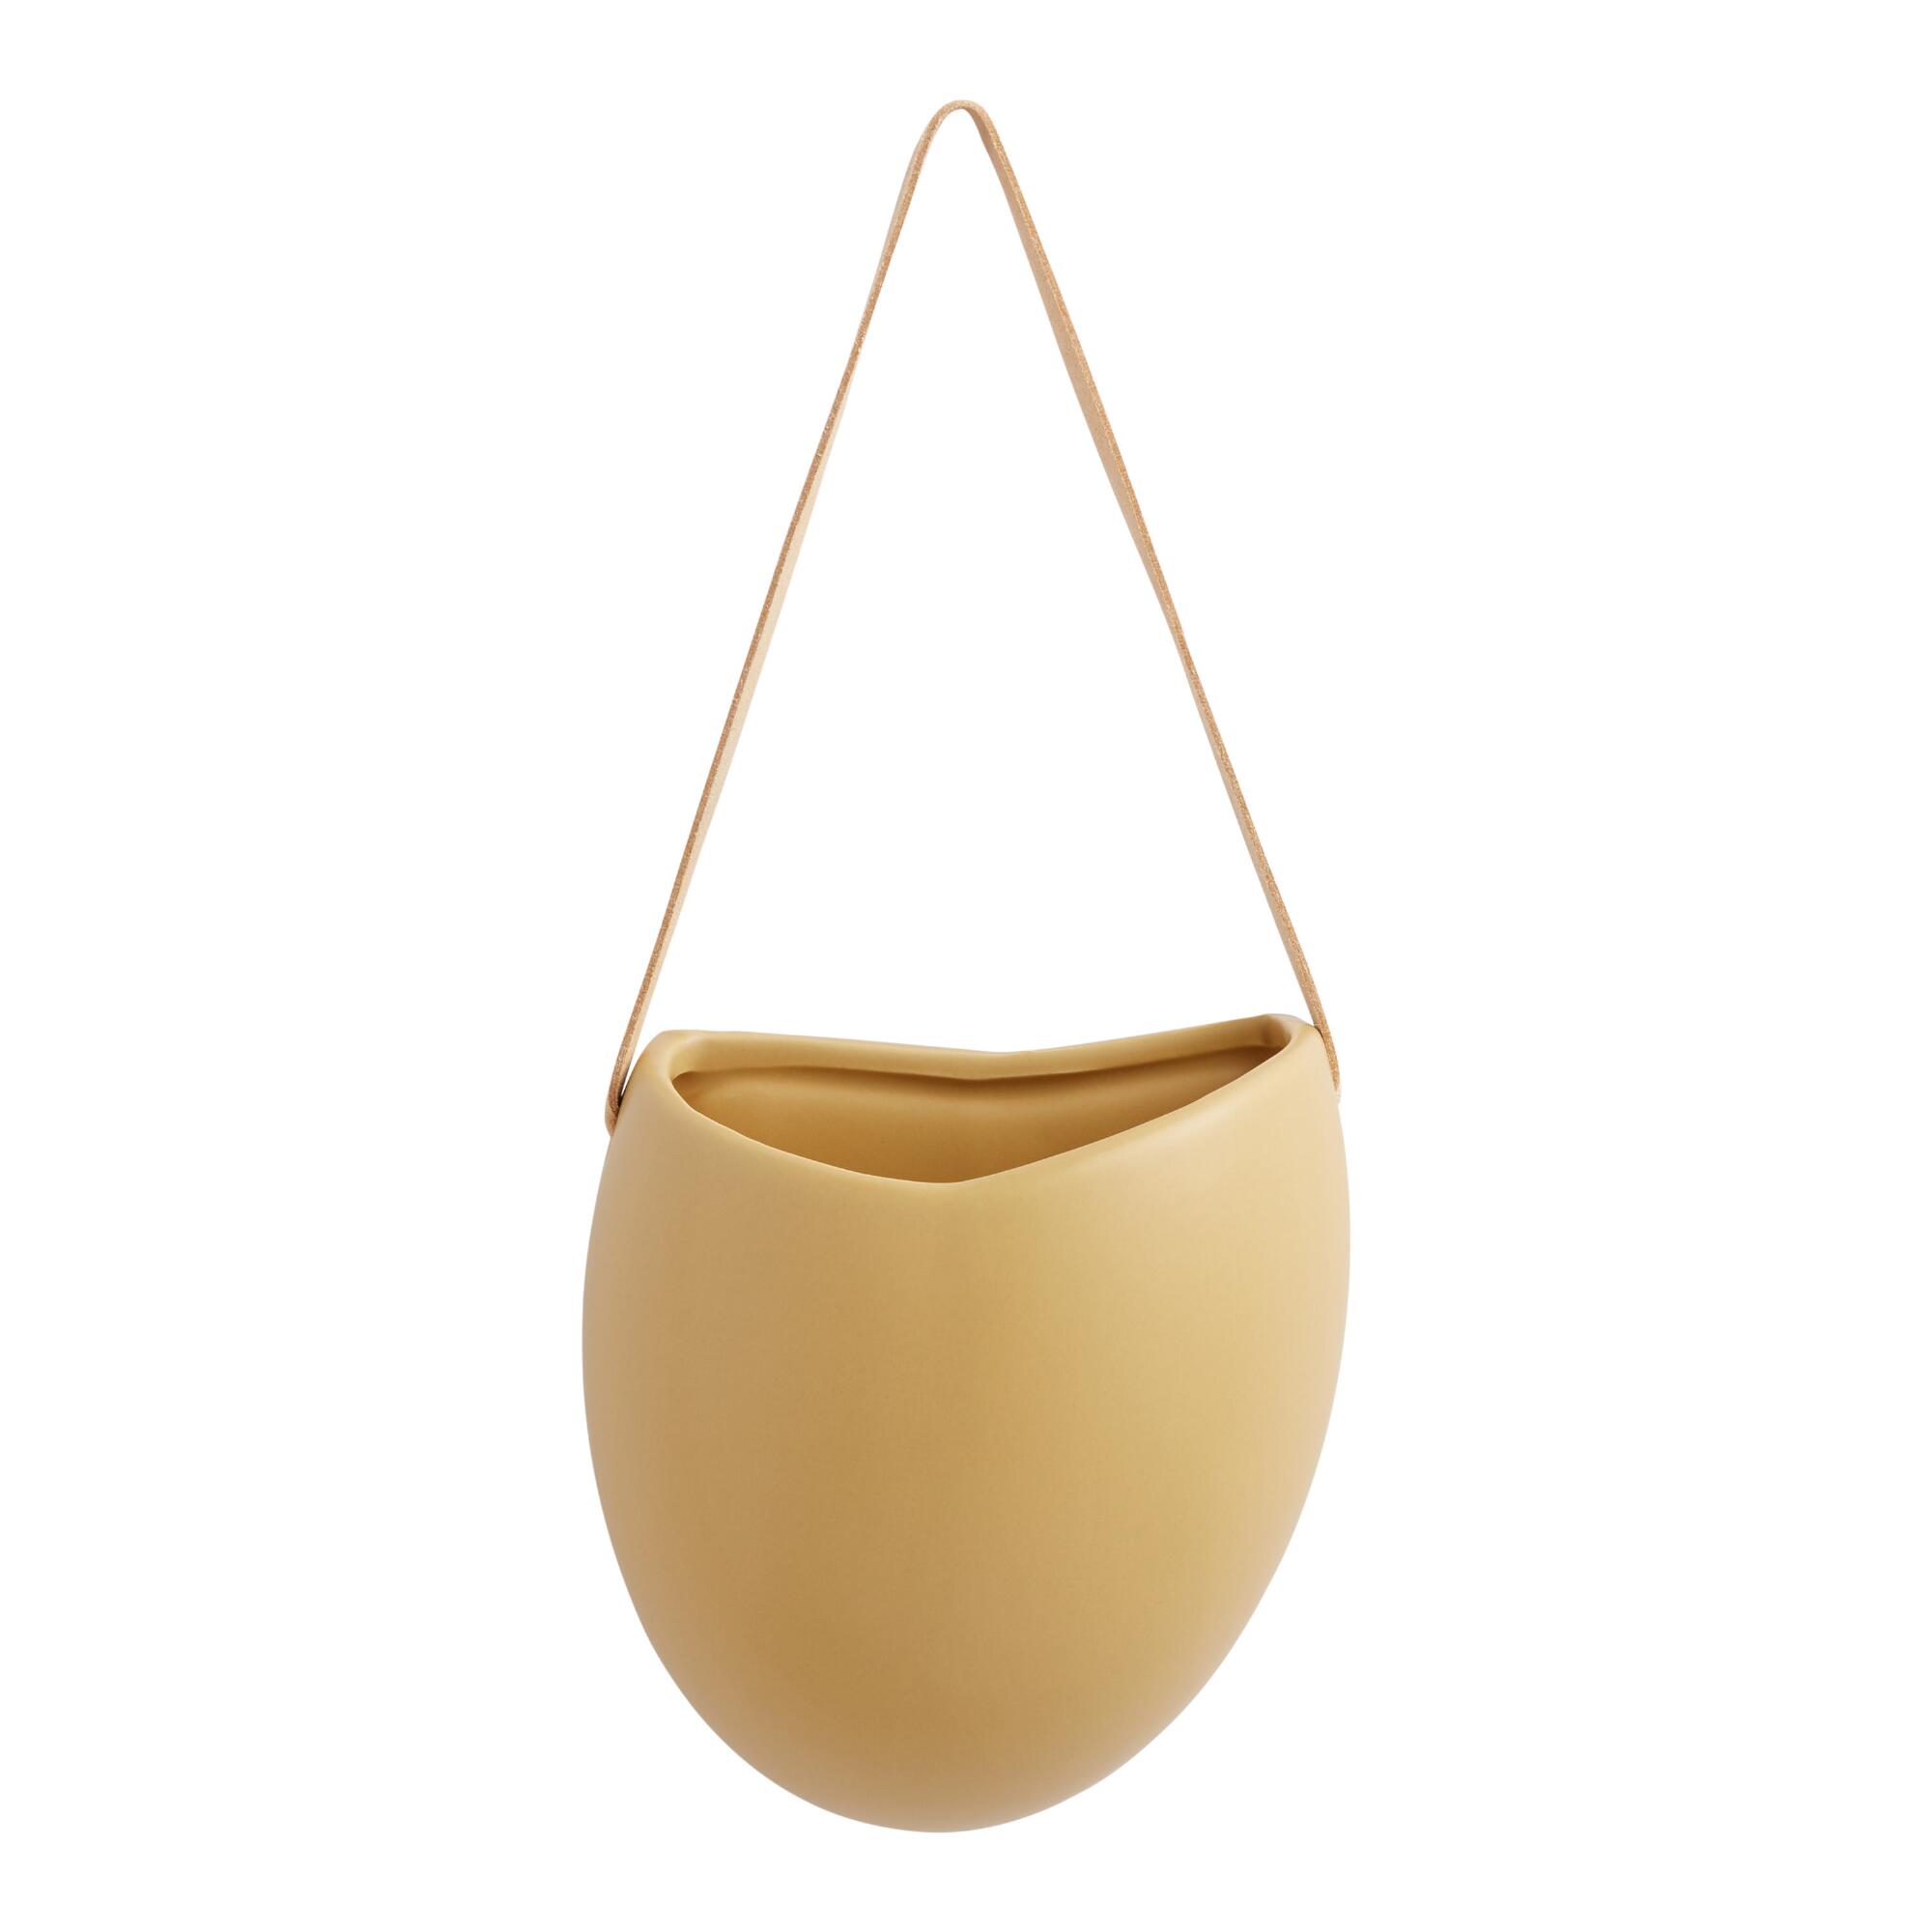 Ochre Ceramic Hanging Wall Planter With Leather Strap: Yellow by World Market